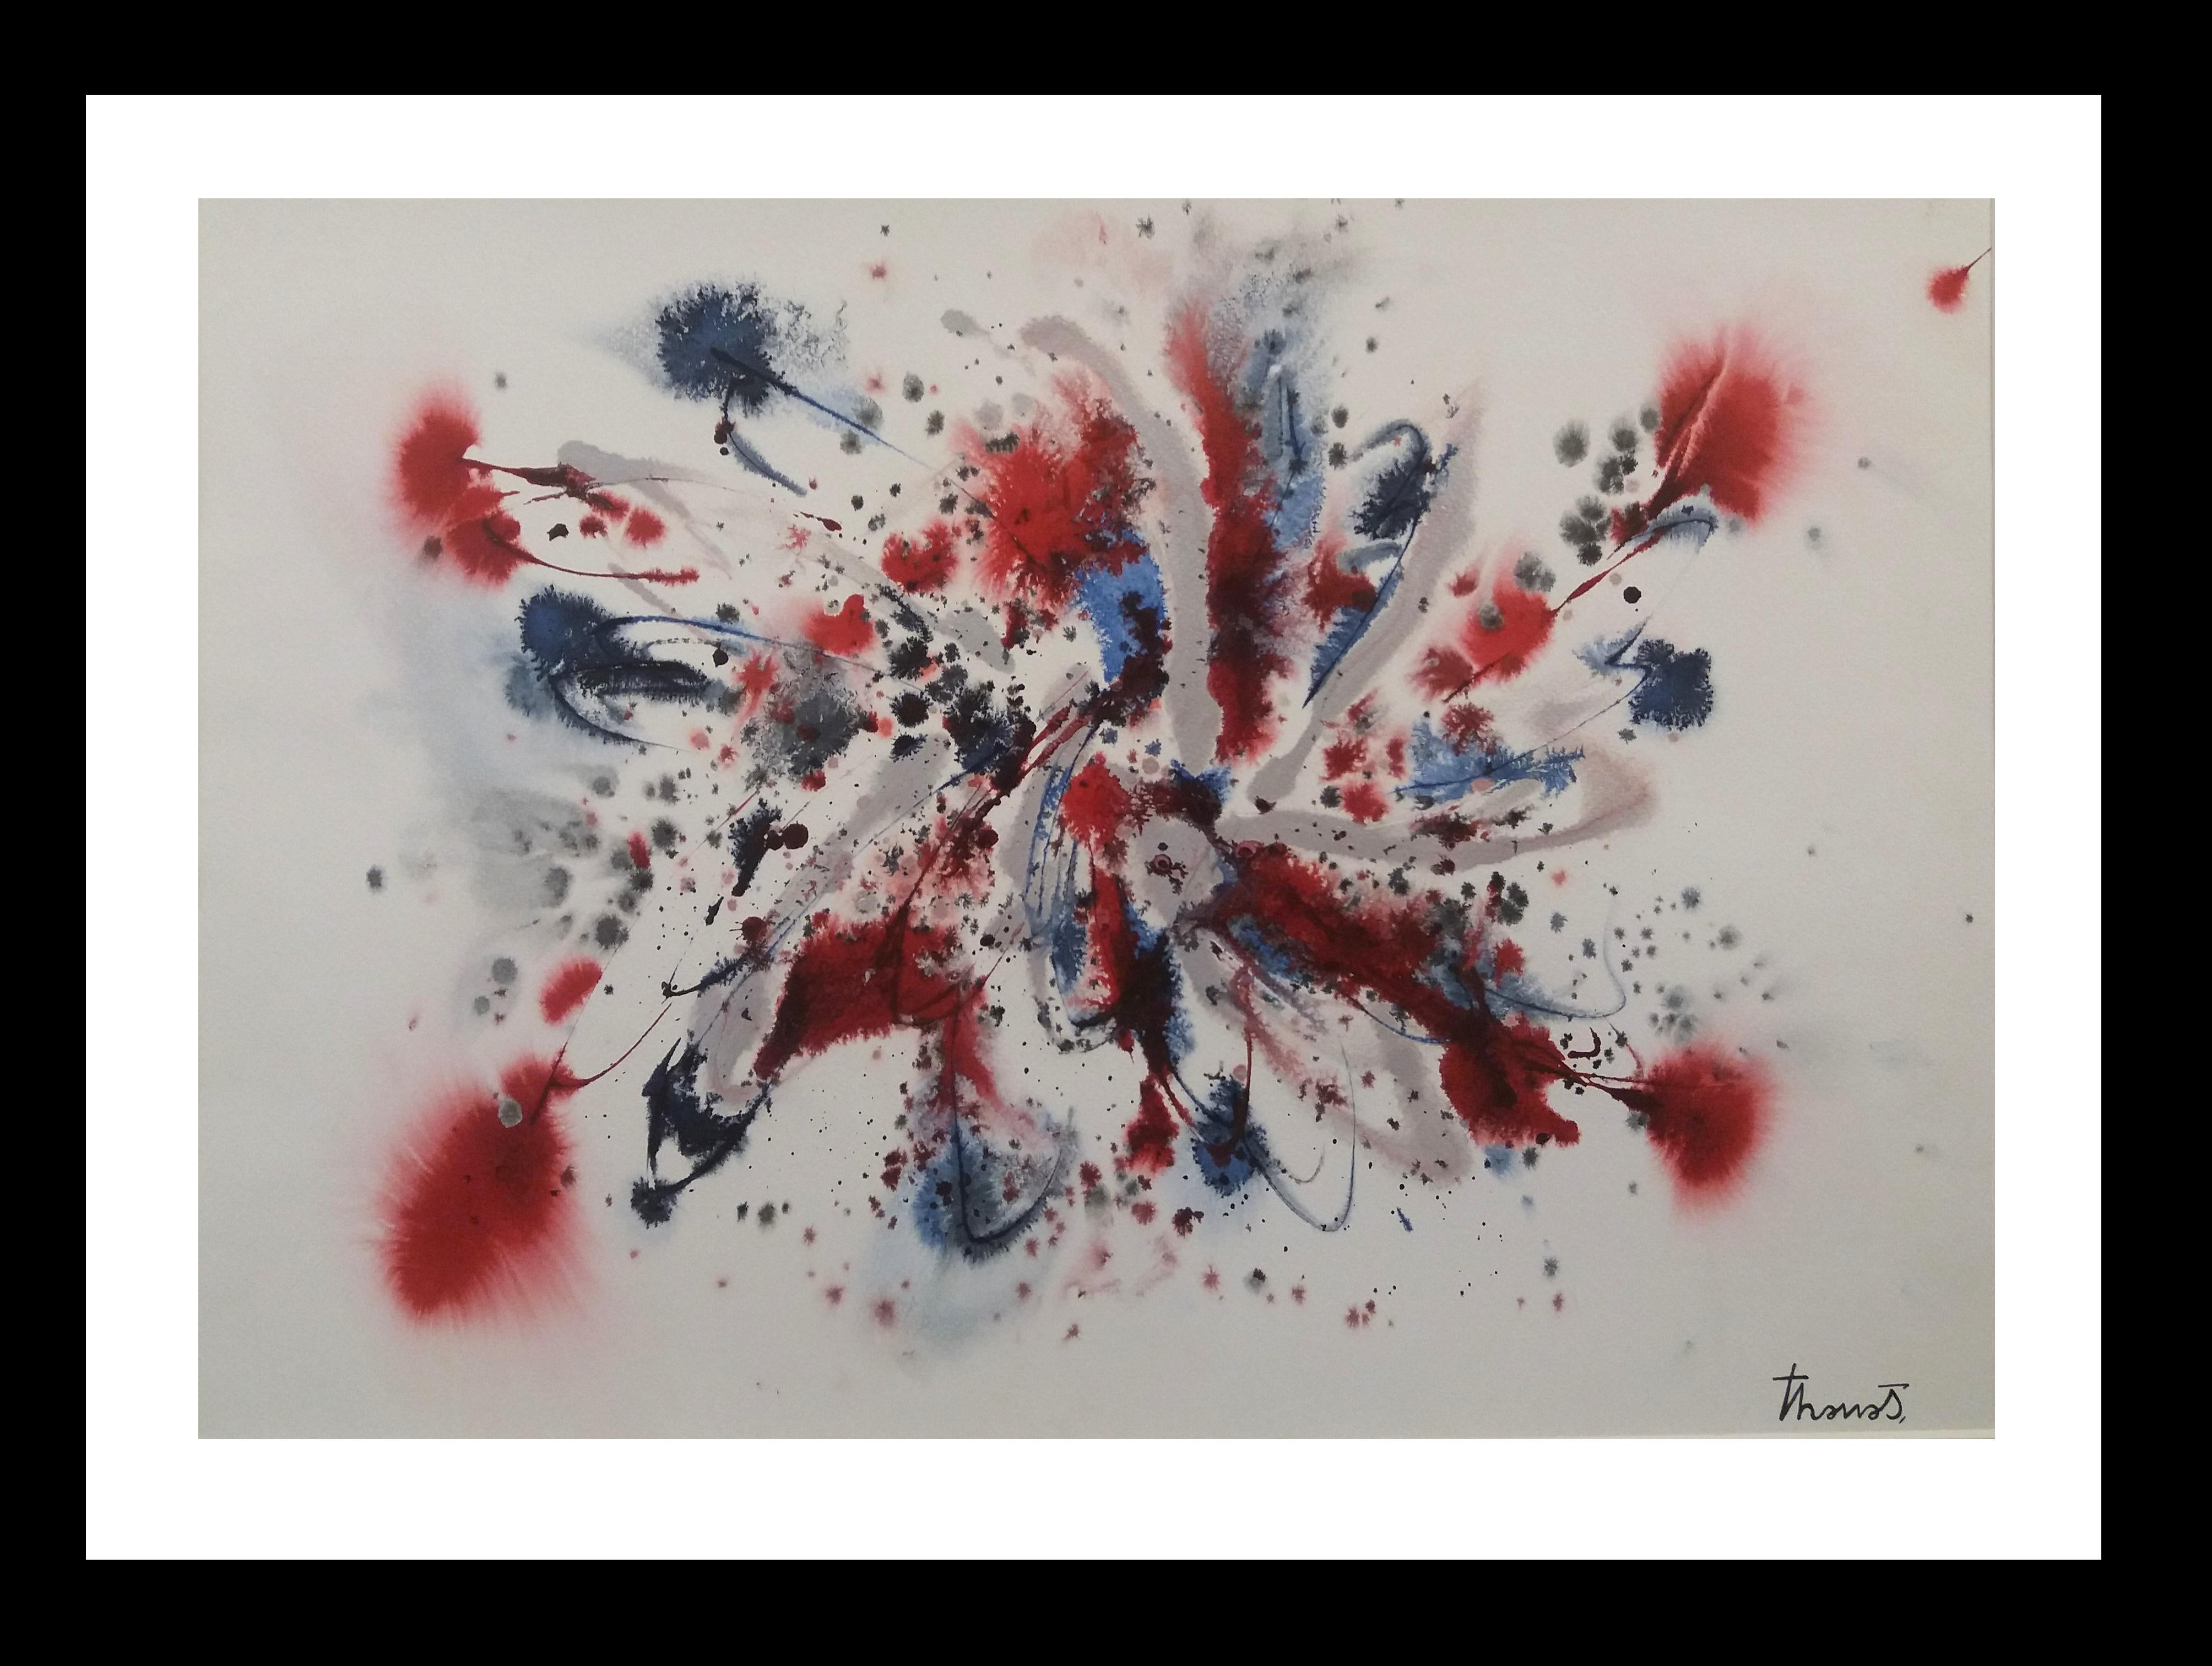 Josep THARRATS Abstract Painting - Tharrats  Red   Black Blue  Original abstract acrylic on paper